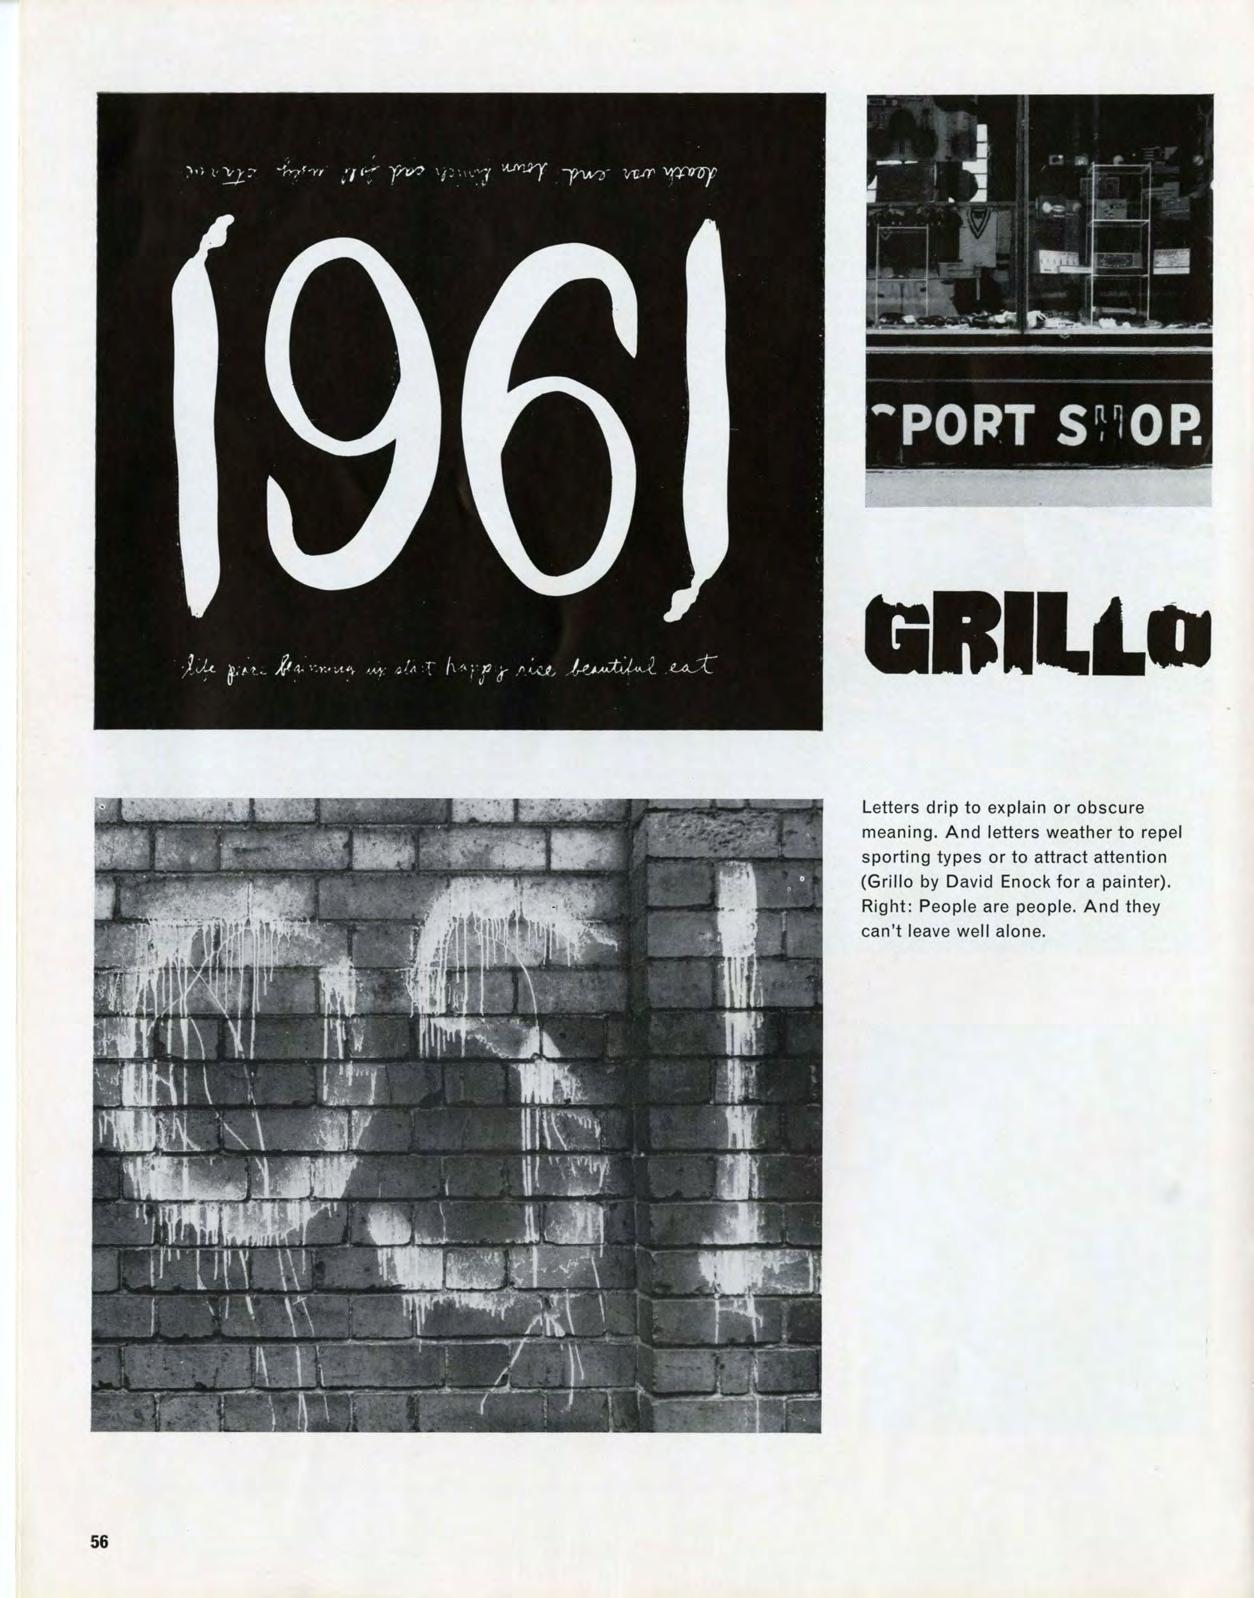 Street Level Feature in Typographica - Read all the descriptions on all the pages
London 1962